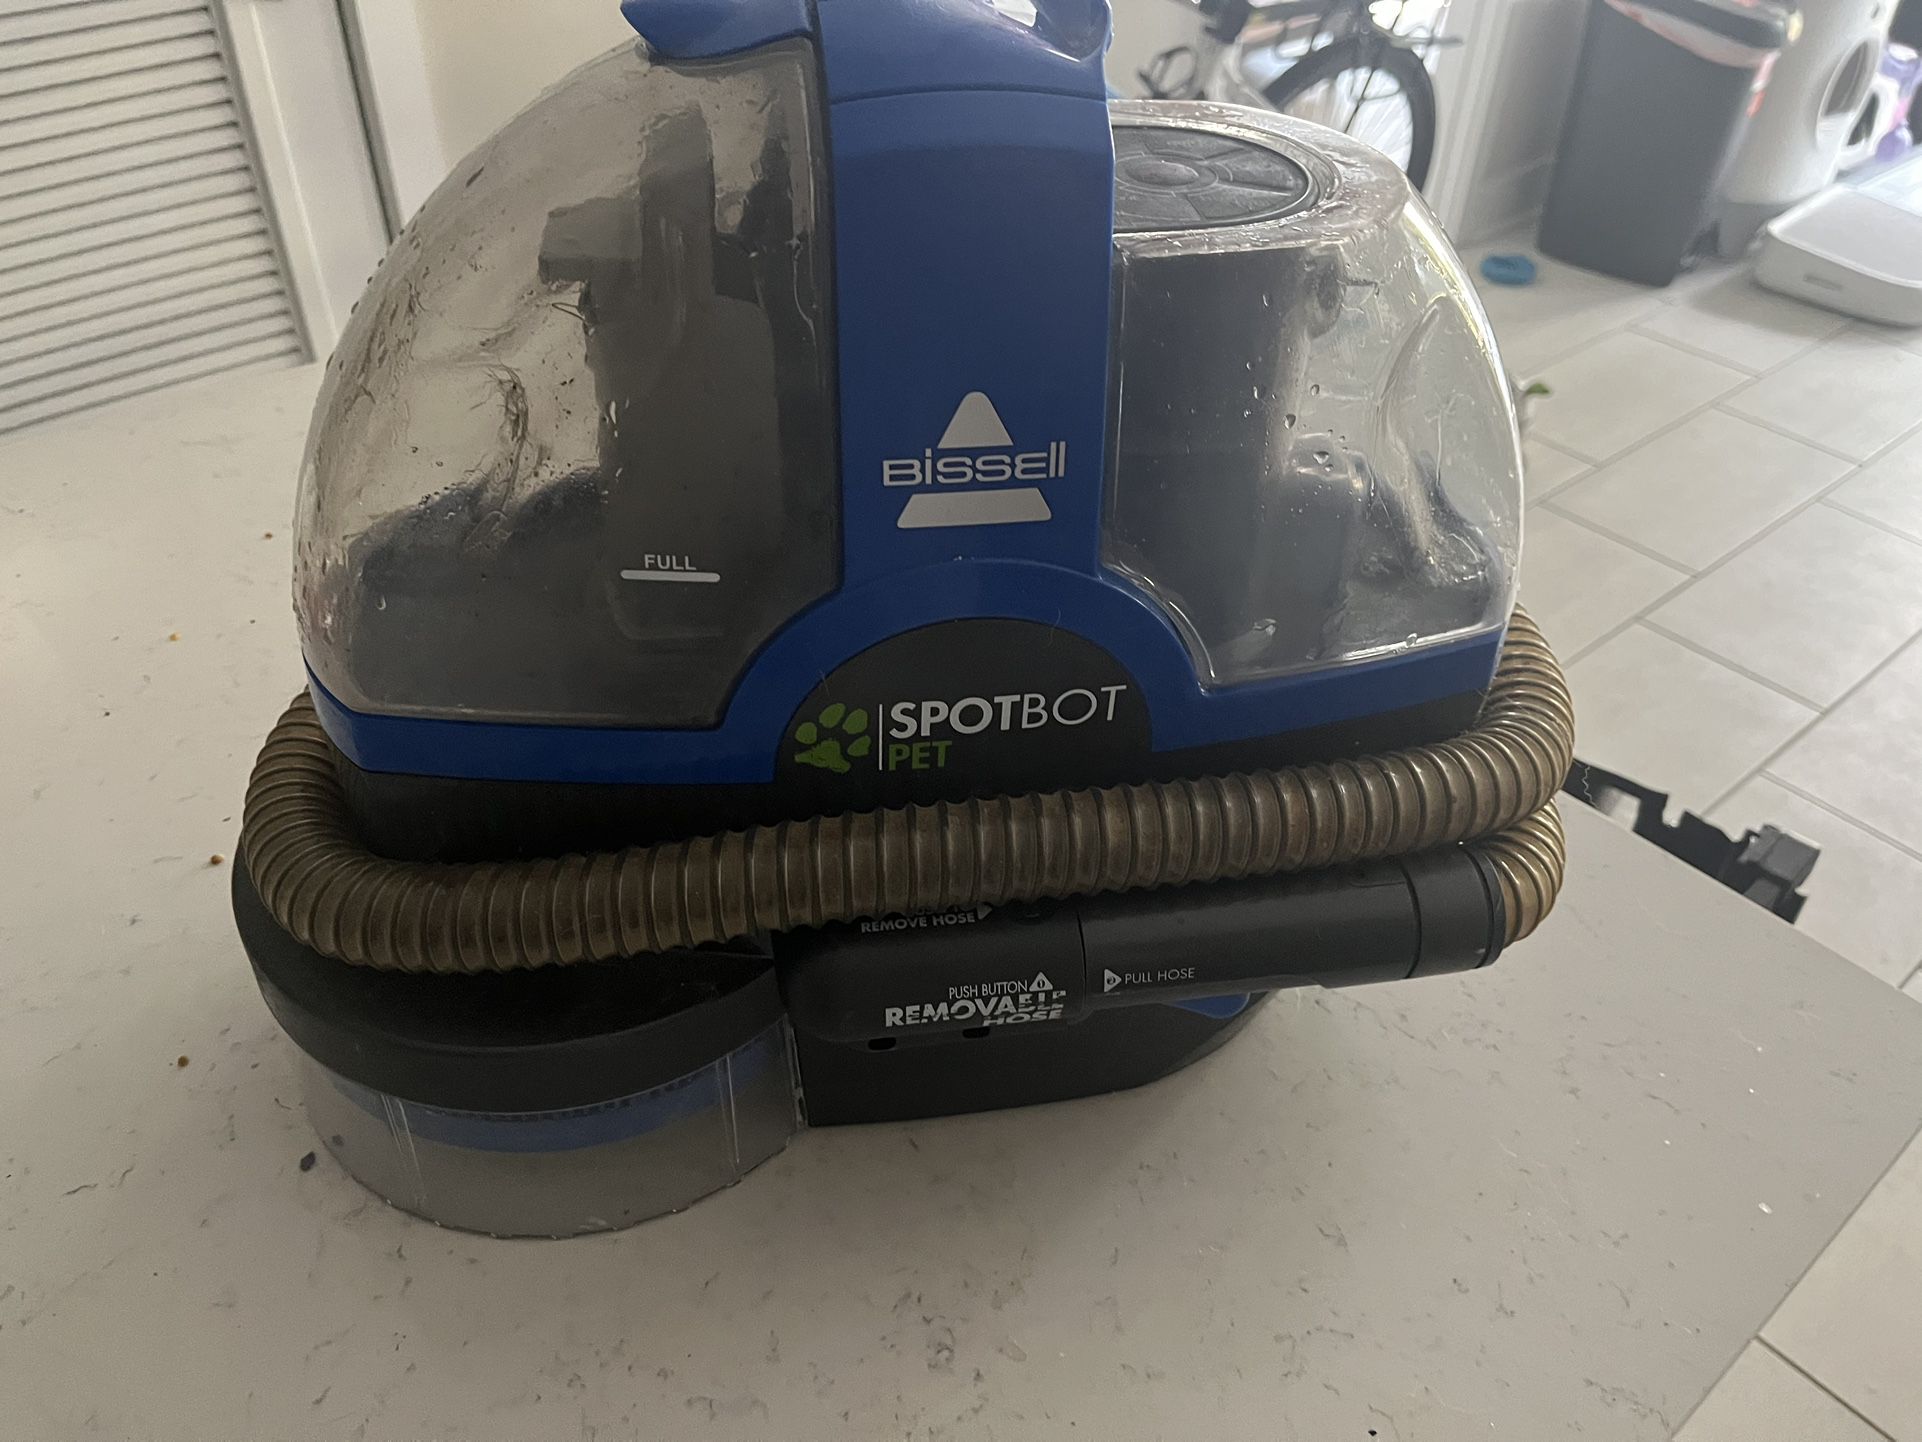 bissell spotbot pet